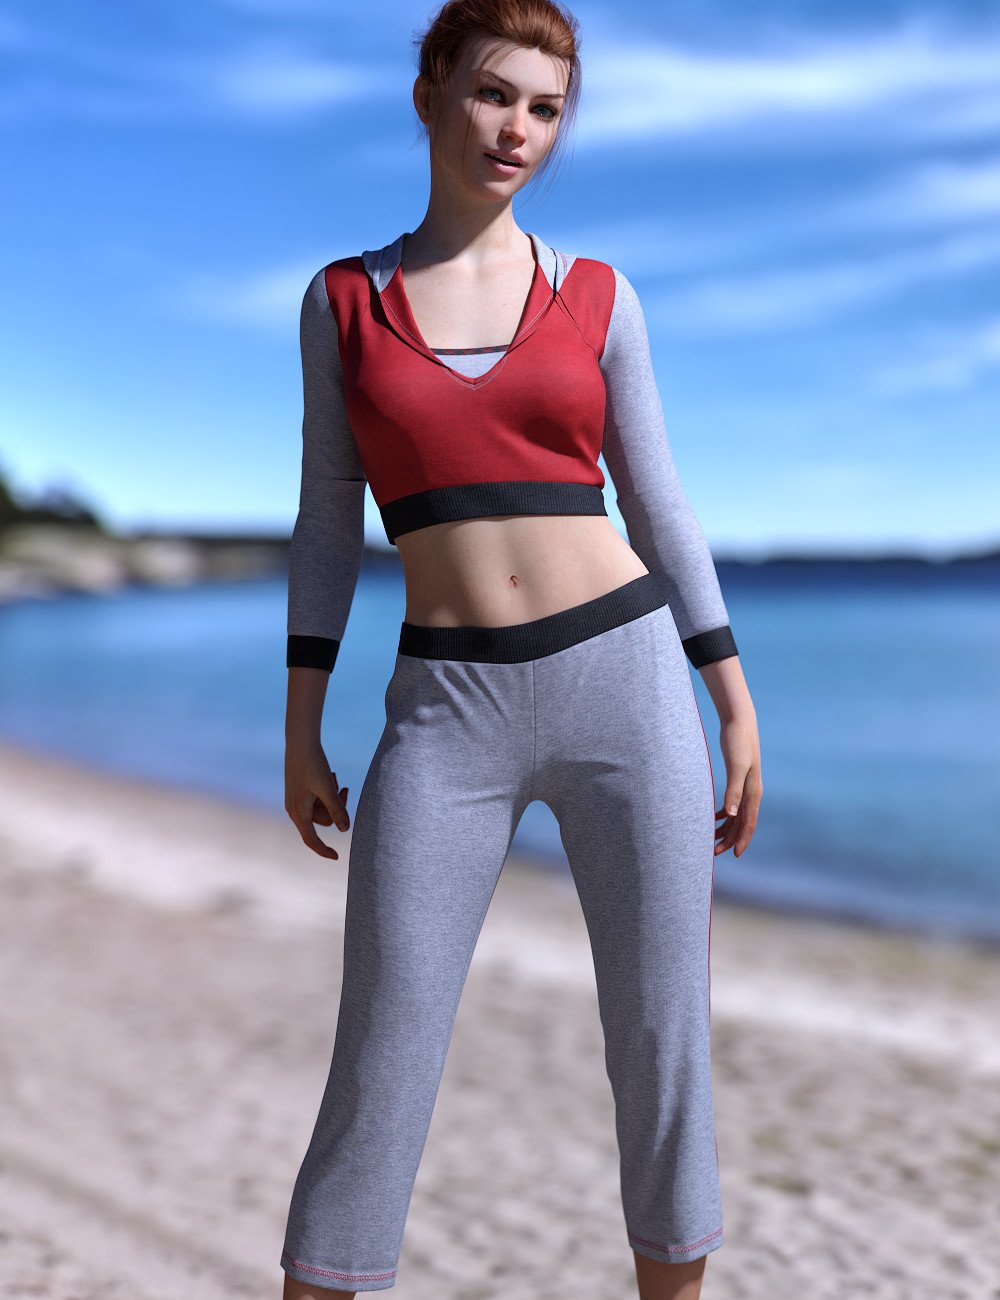 dForce Summer Fit Outfit for Genesis 8 and 8.1 Female by: Leviathan, 3D Models by Daz 3D